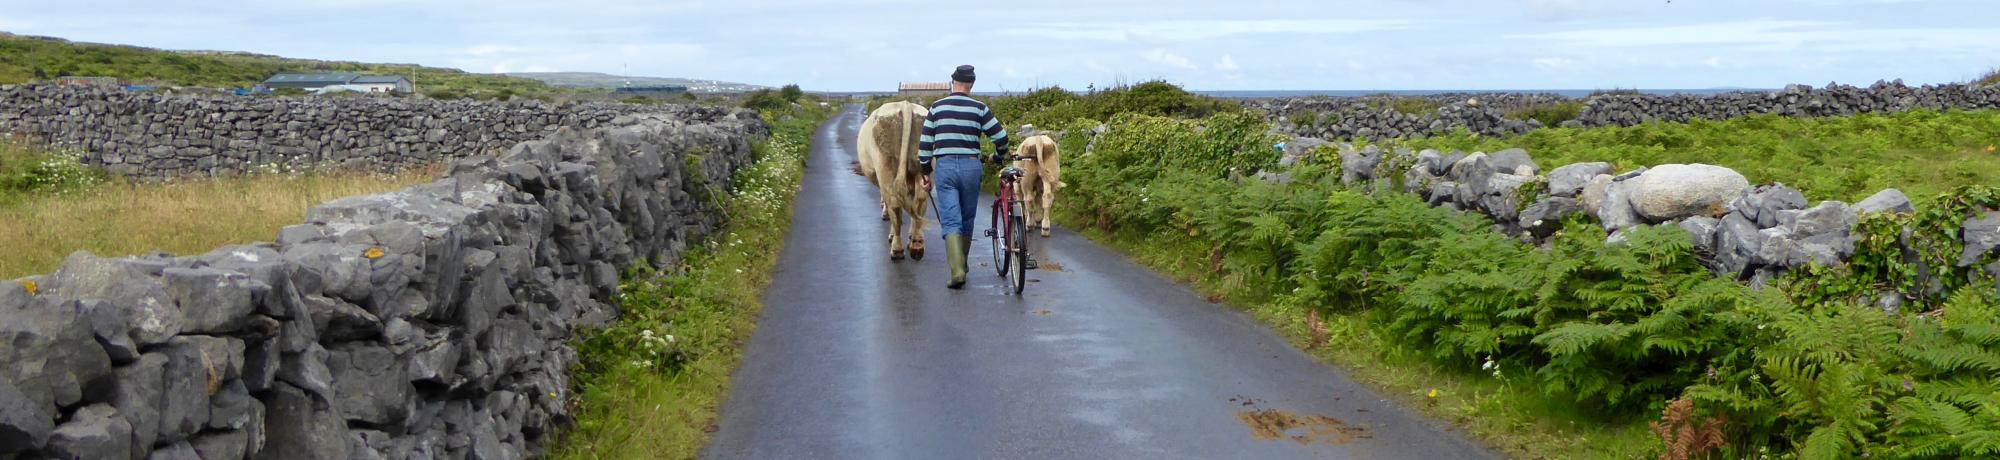 Kendra Moore's photo of a farmer walking two cows down a road bordered by green fields and low-lying rock walls